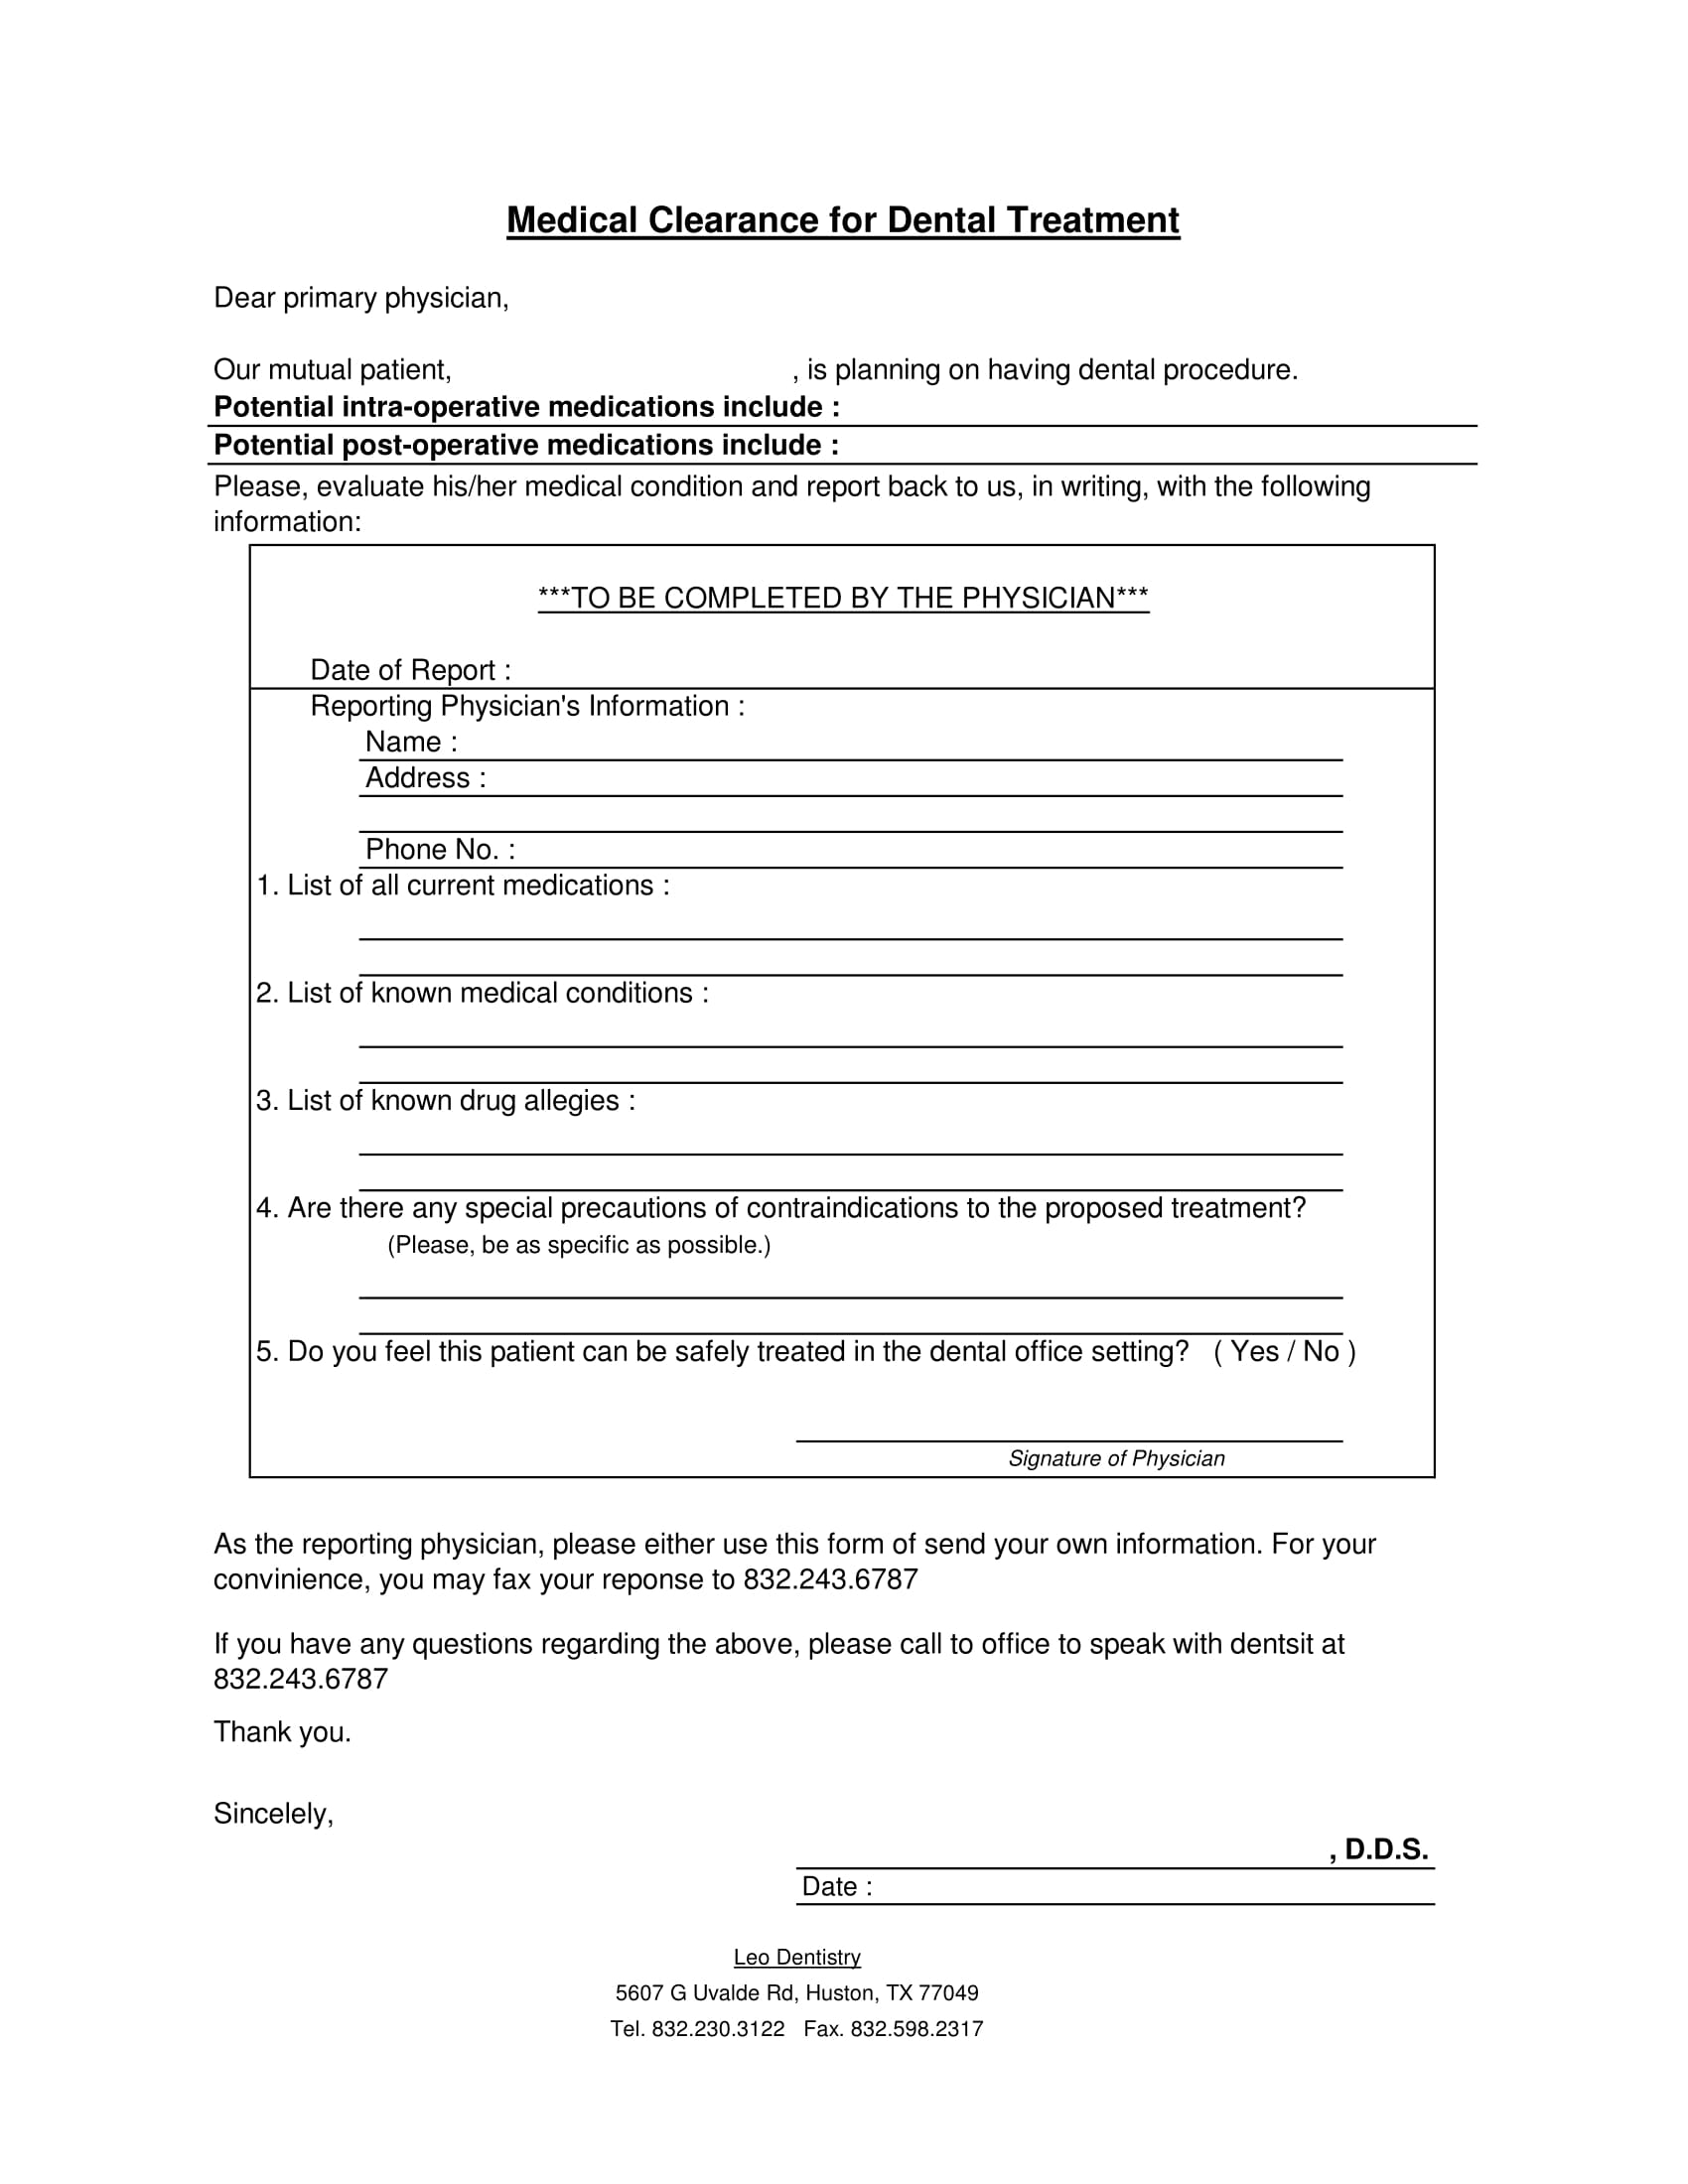 FREE 30+ Medical Clearance Forms in PDF MS Word